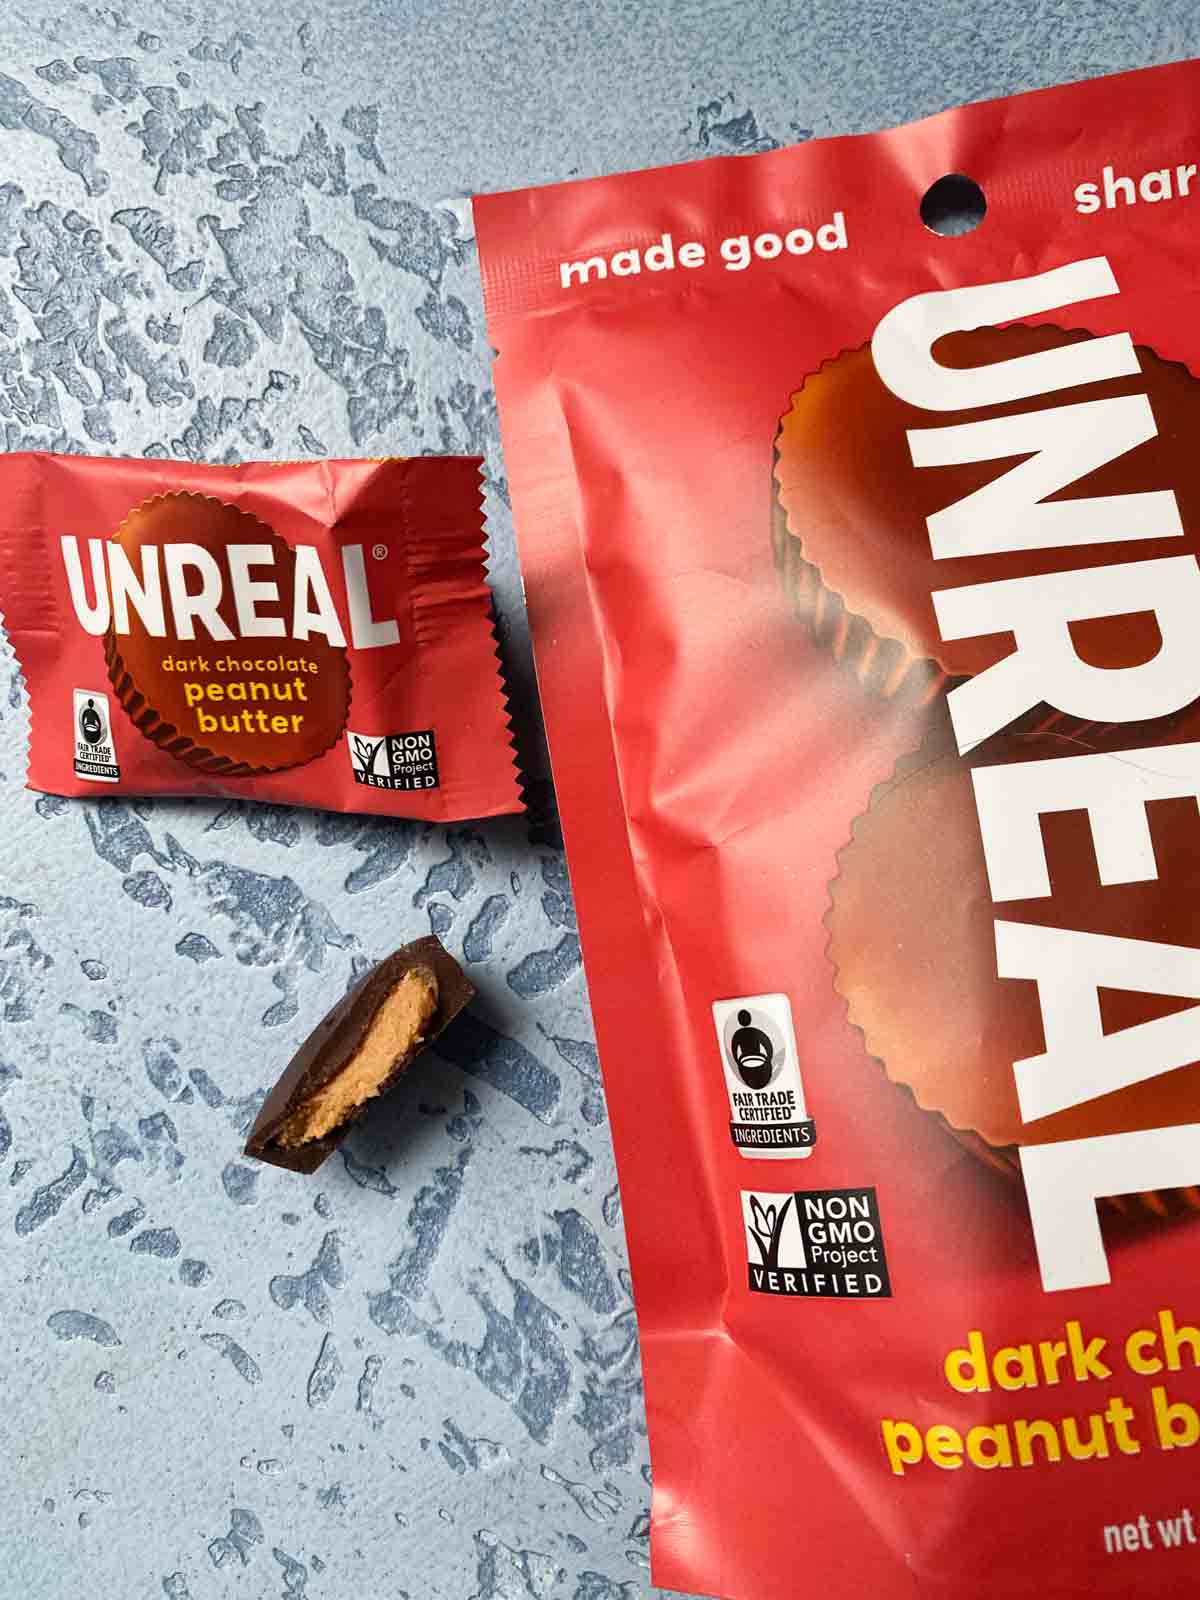 Unreal dark chocolate peanut butter cups package and showing inside of cup